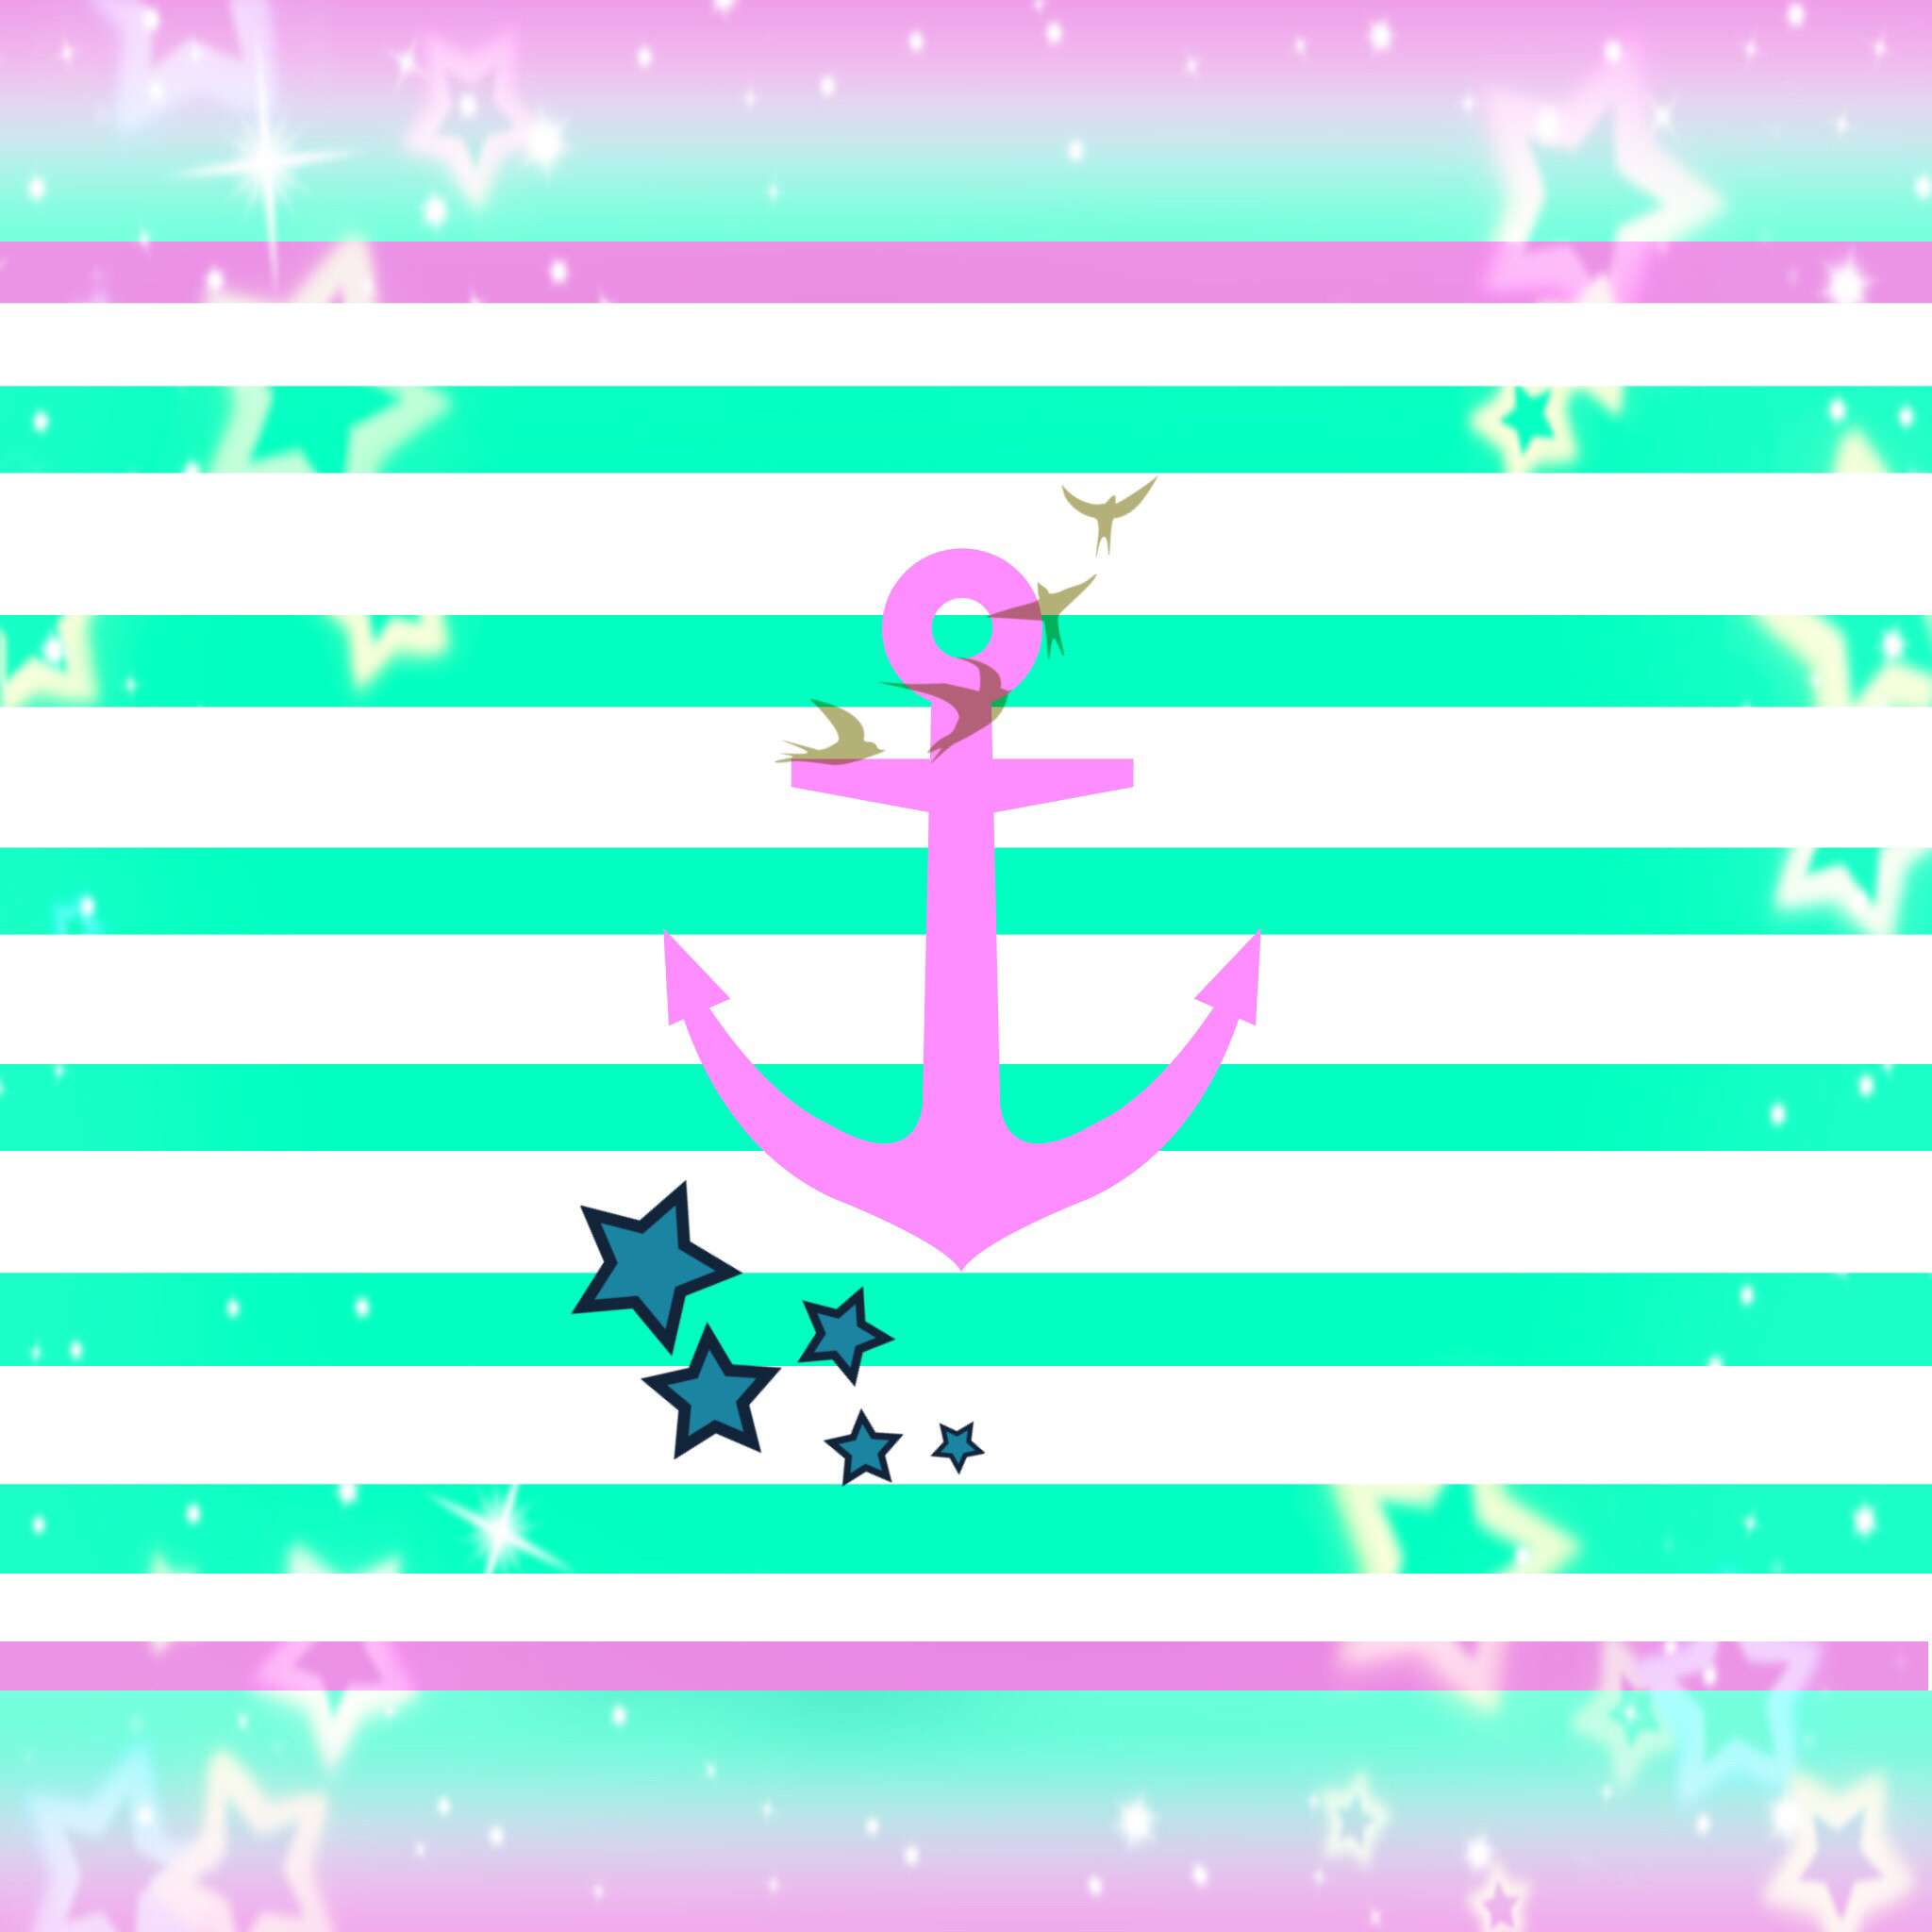 2048x2048 Pretty Wallpapers, Phone Wallpapers, Anchors, Nautical, Kefir, Girly,  Miscarriage, Keyboard, Backgrounds